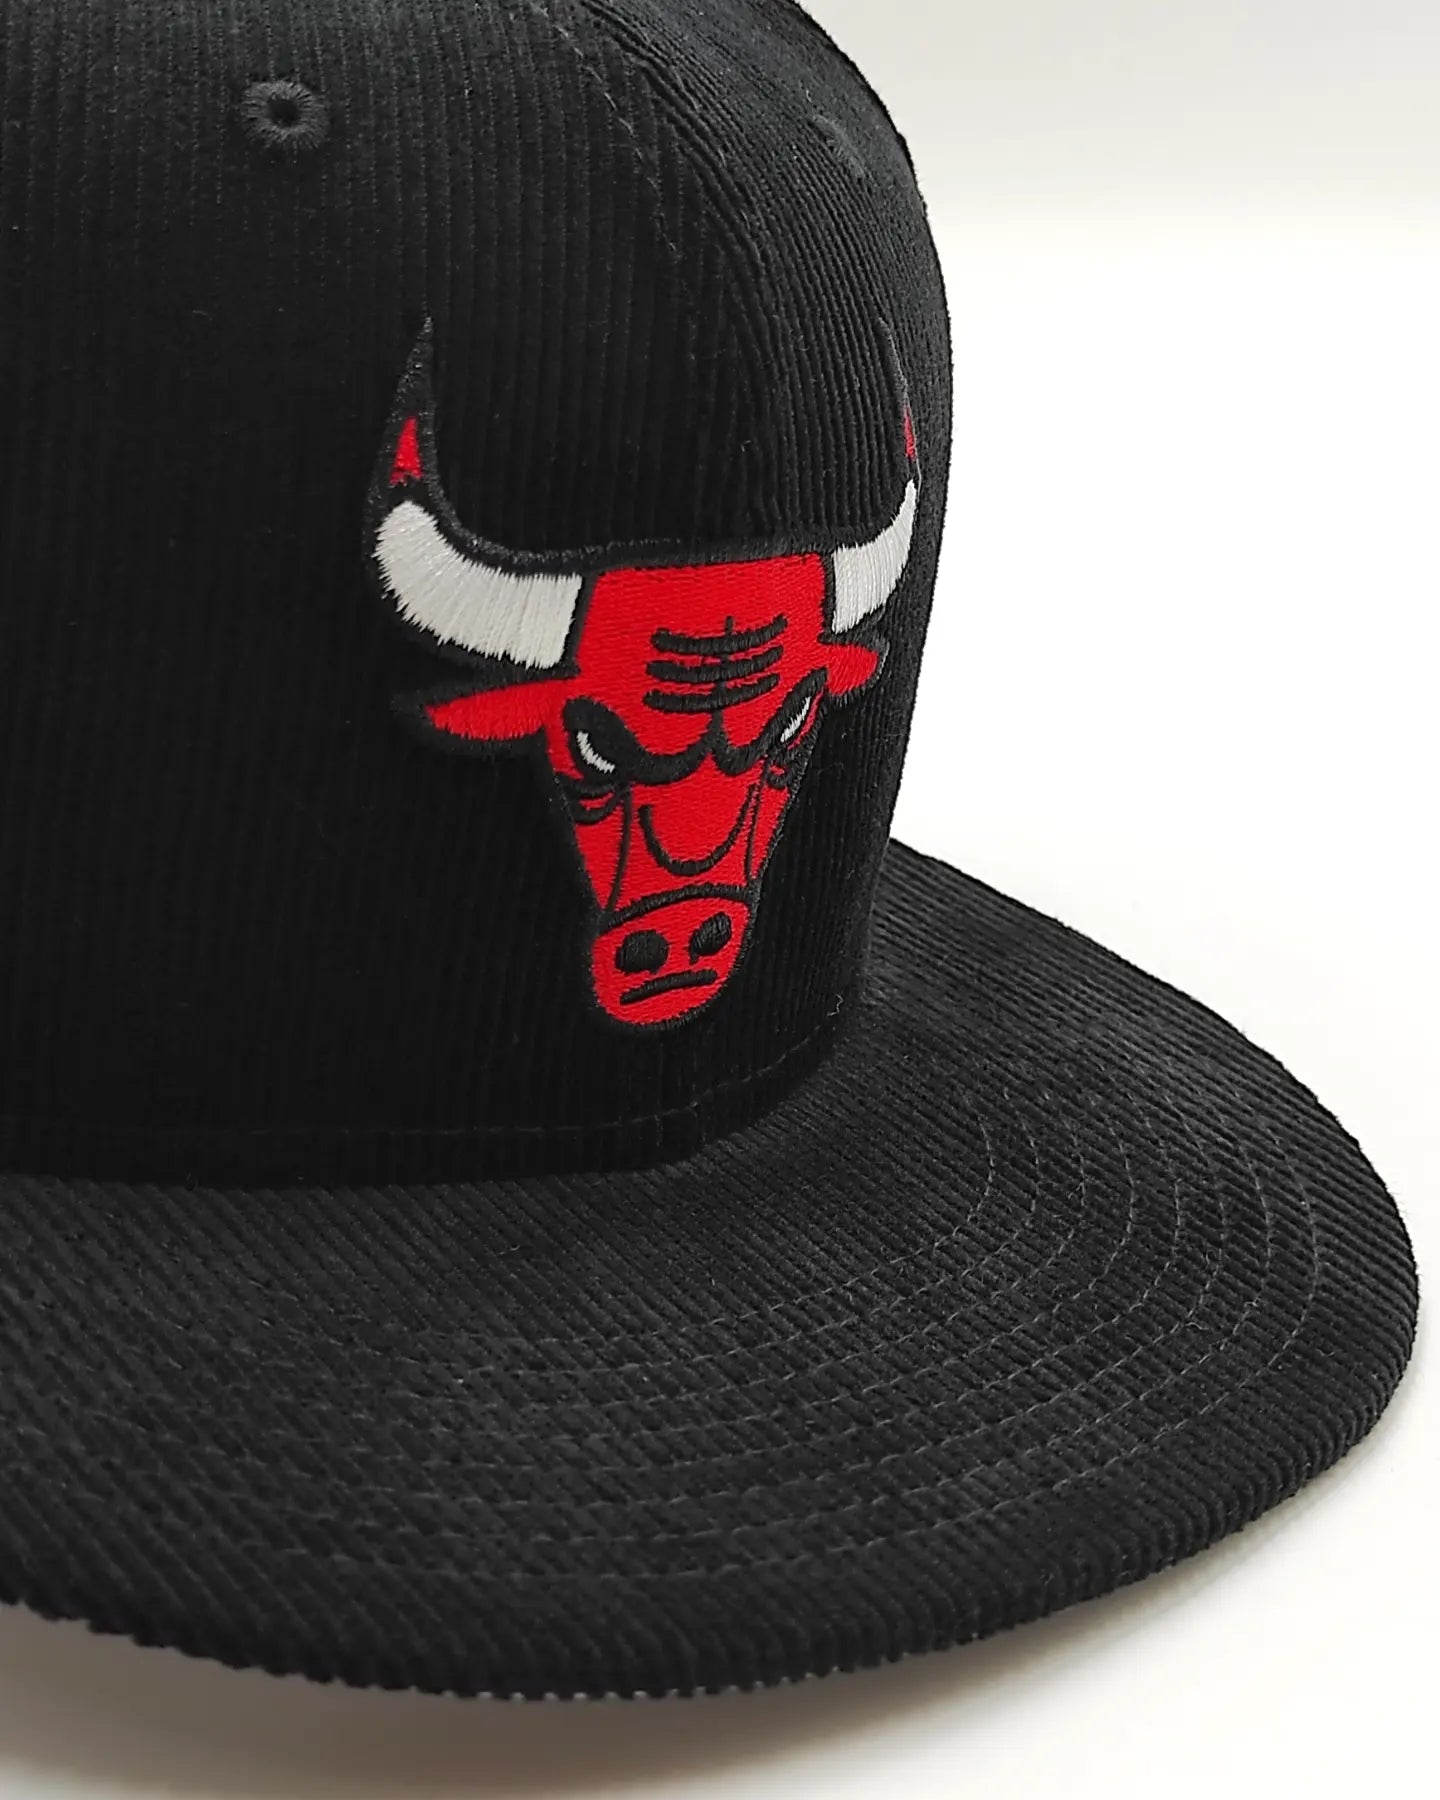 Chicago Bulls OLD SCHOOL CORDUROY SIDE-PATCH Black Fitted Hat by New Era